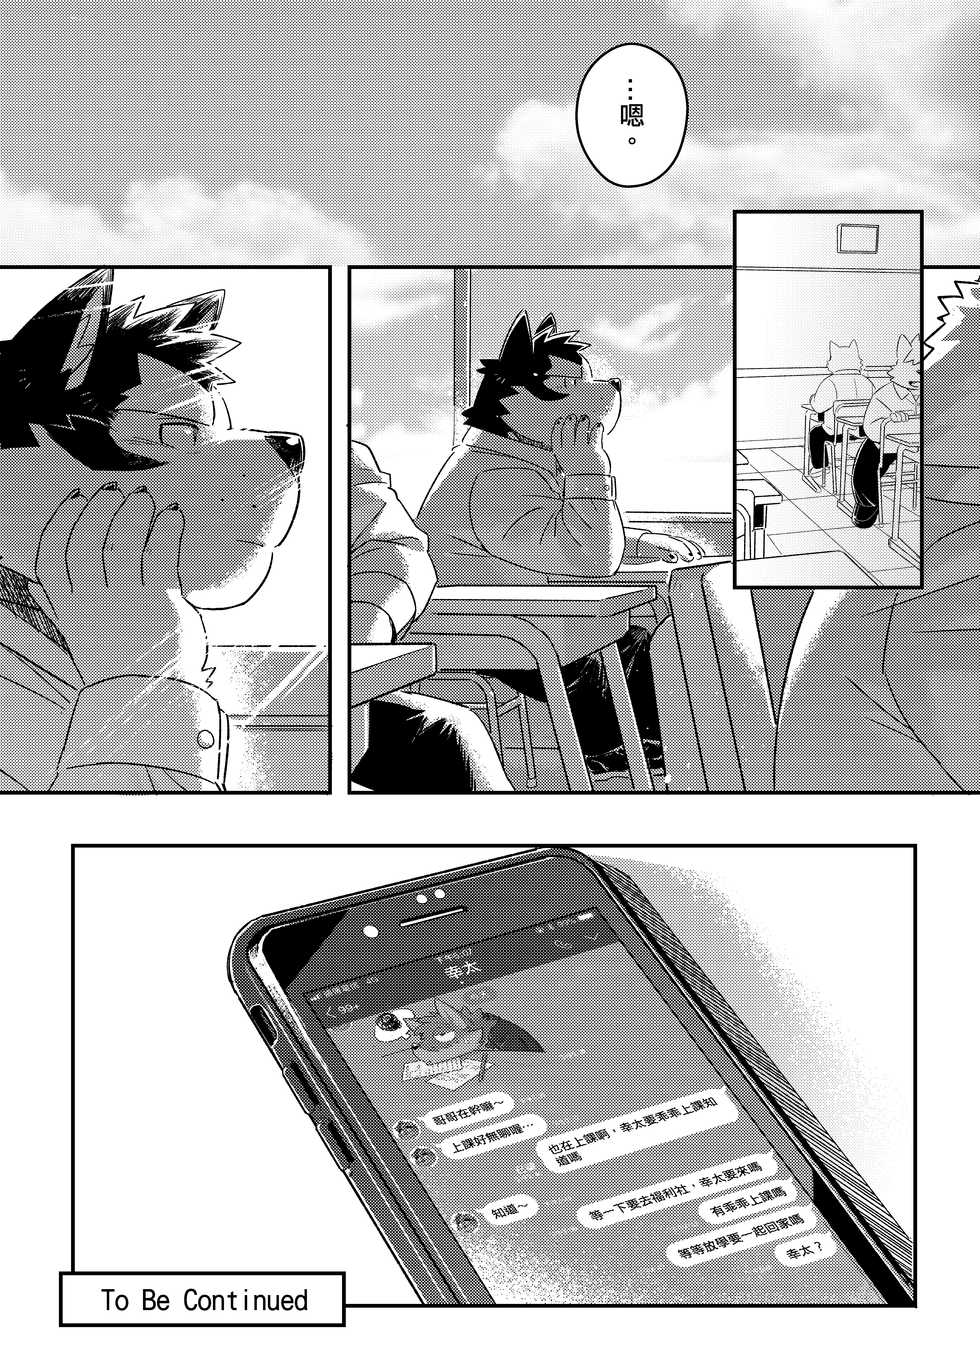 [WILD STYLE (Ross)] Distance | 最遙遠的距離 [Chinese] [Digital] - Page 22